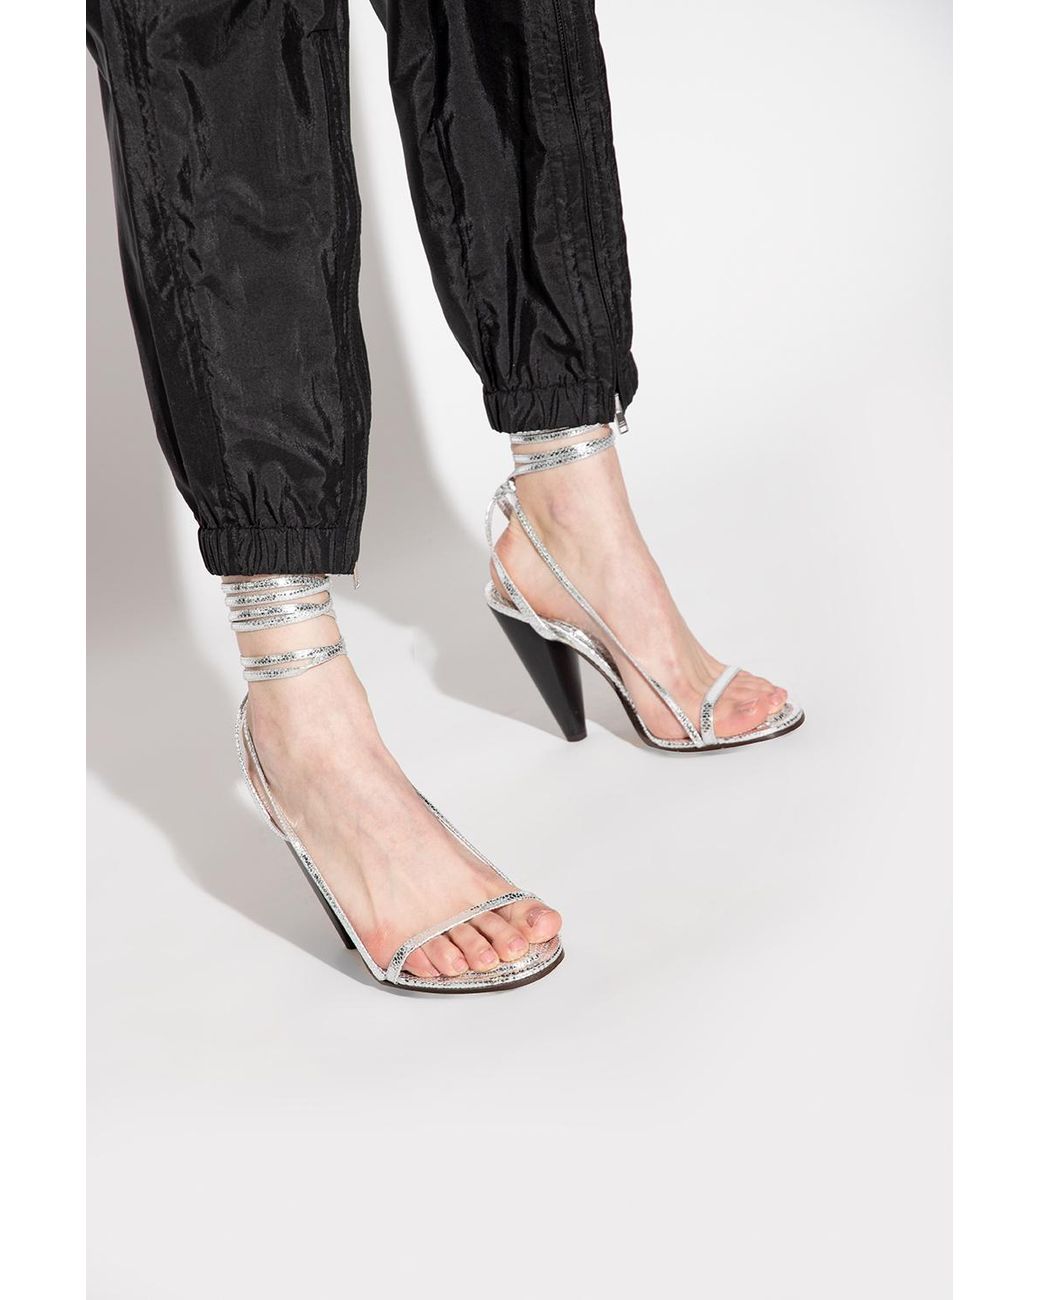 Isabel Marant 'aliza' Heeled Sandals in | Lyst